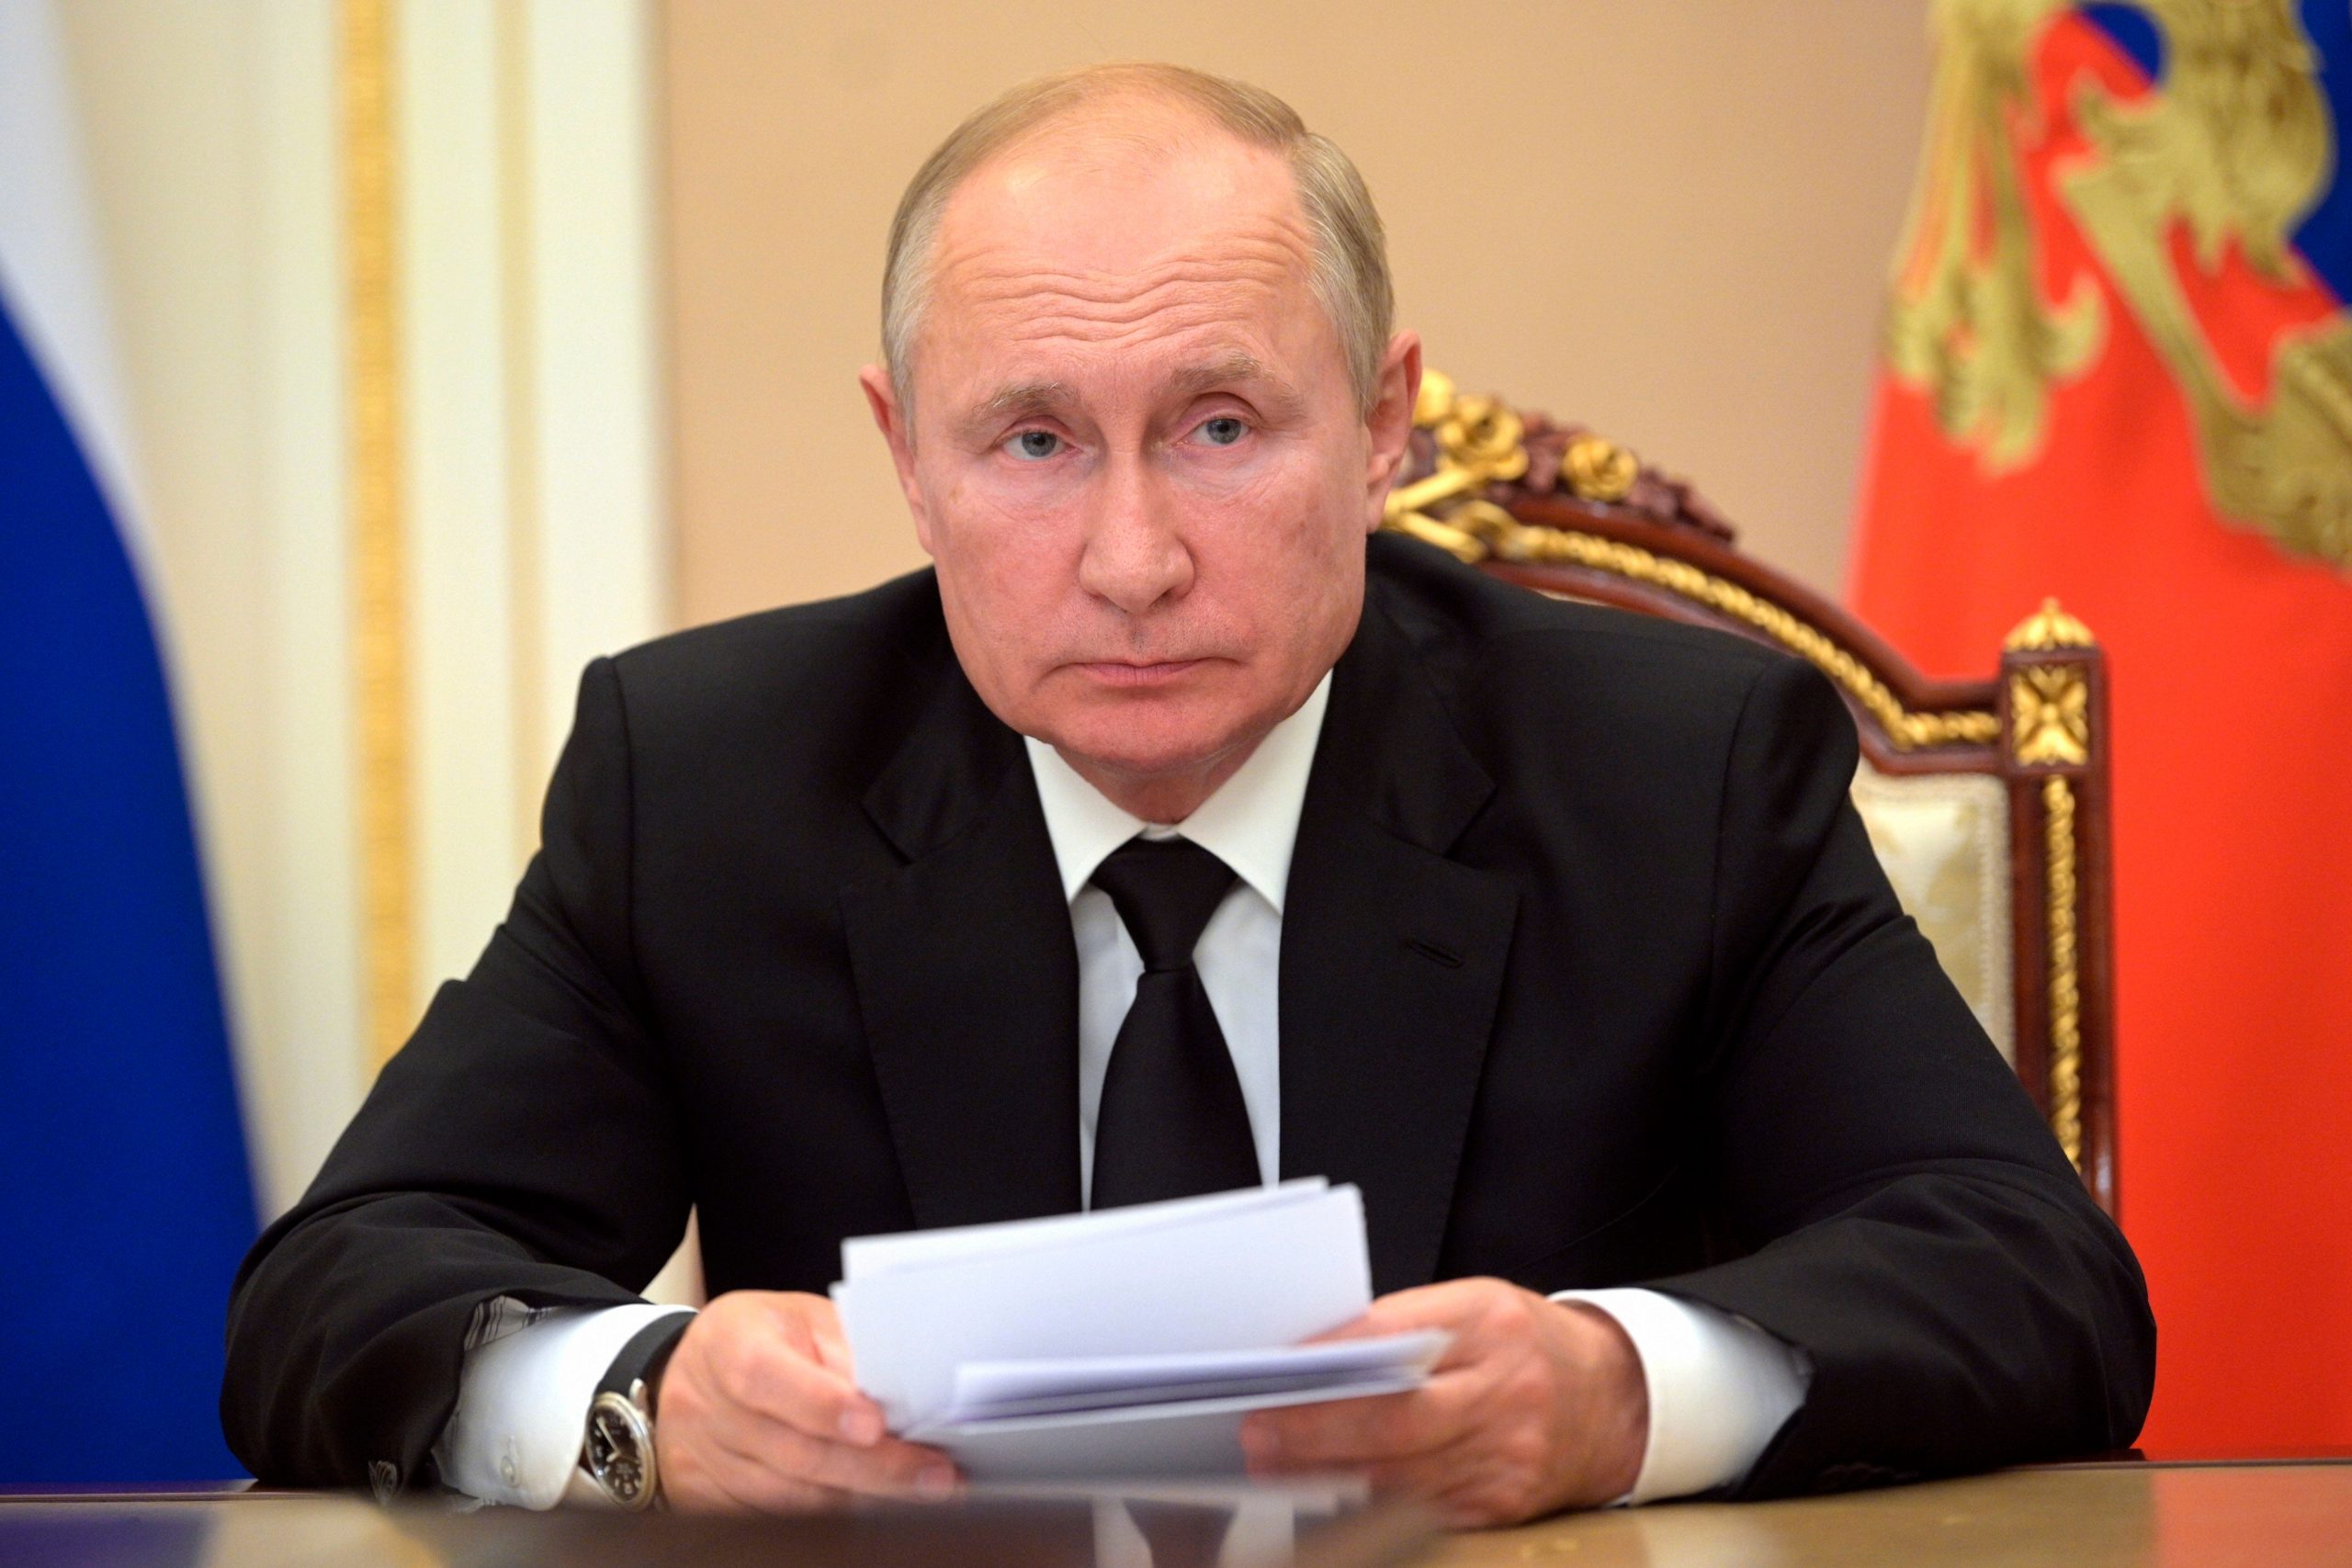 Vladimir Putin to self-isolate as inner circle members contract COVID-19